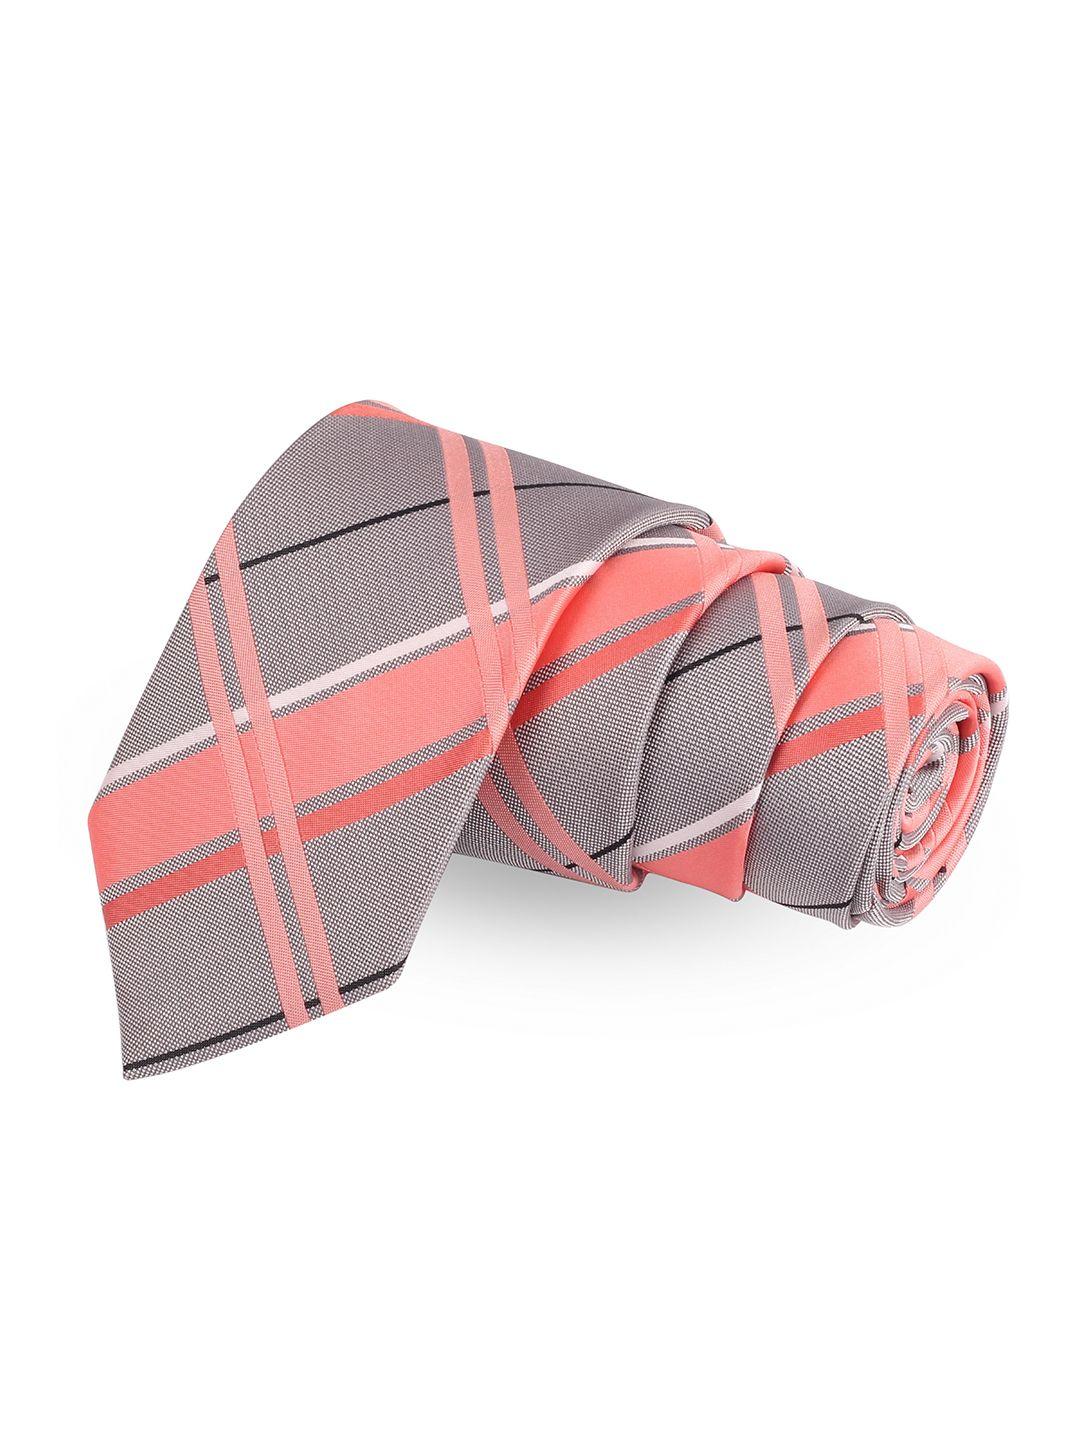 peluche men grey & peach-coloured checked broad tie with brooch & collar stay